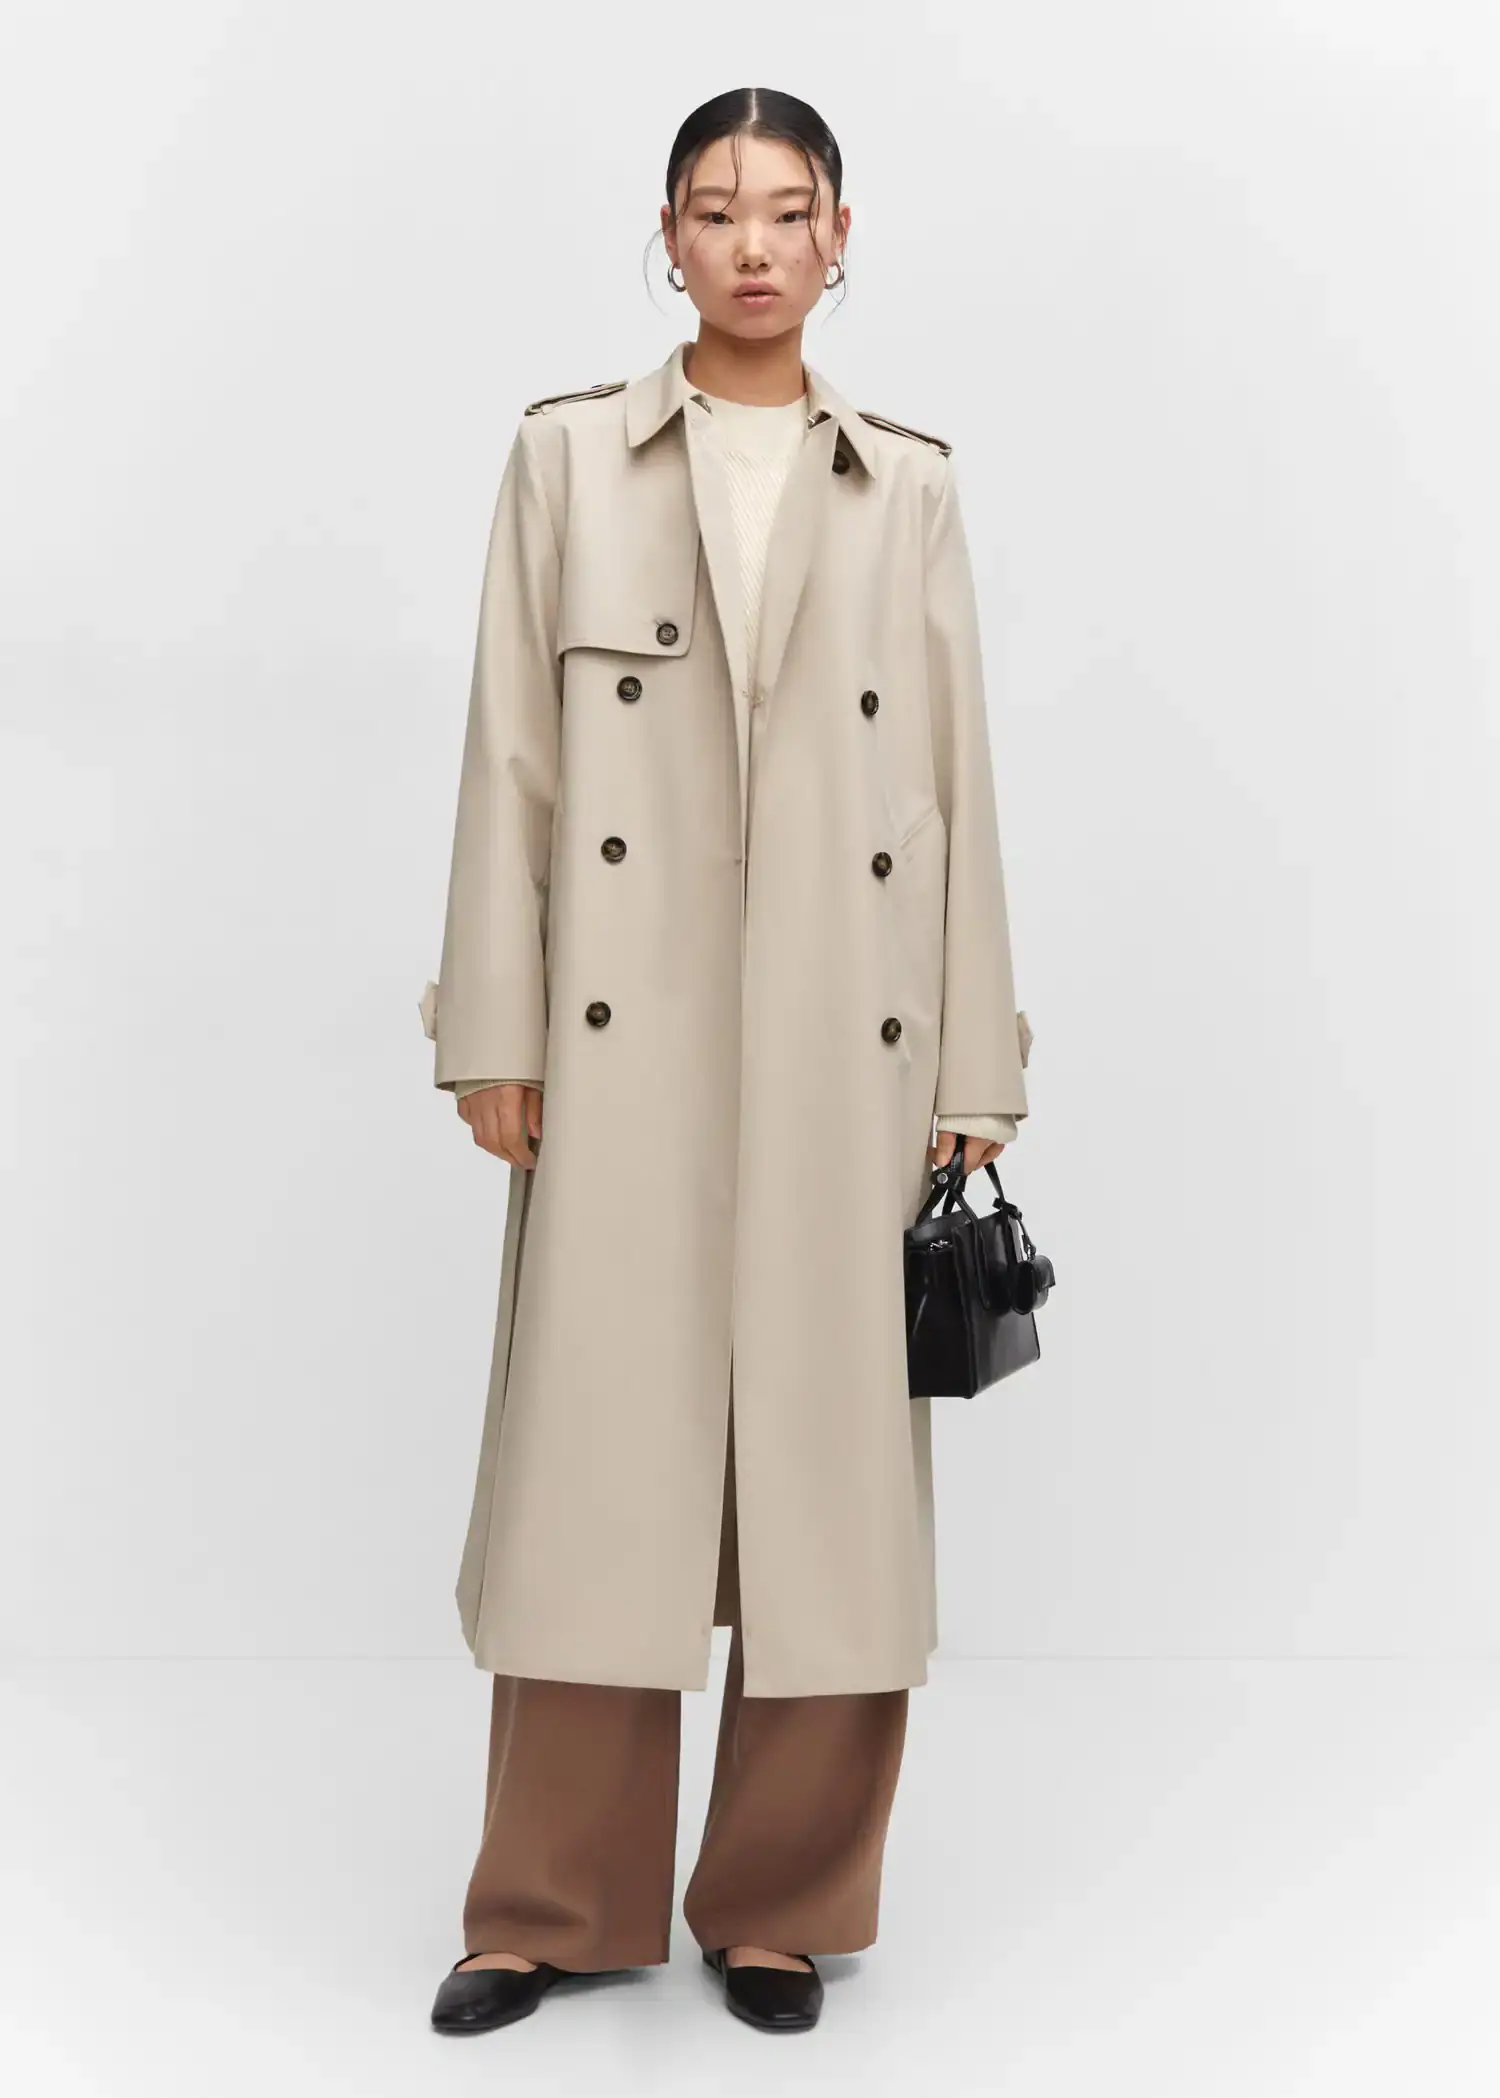 Mango Waterproof double-breasted trench coat. 3